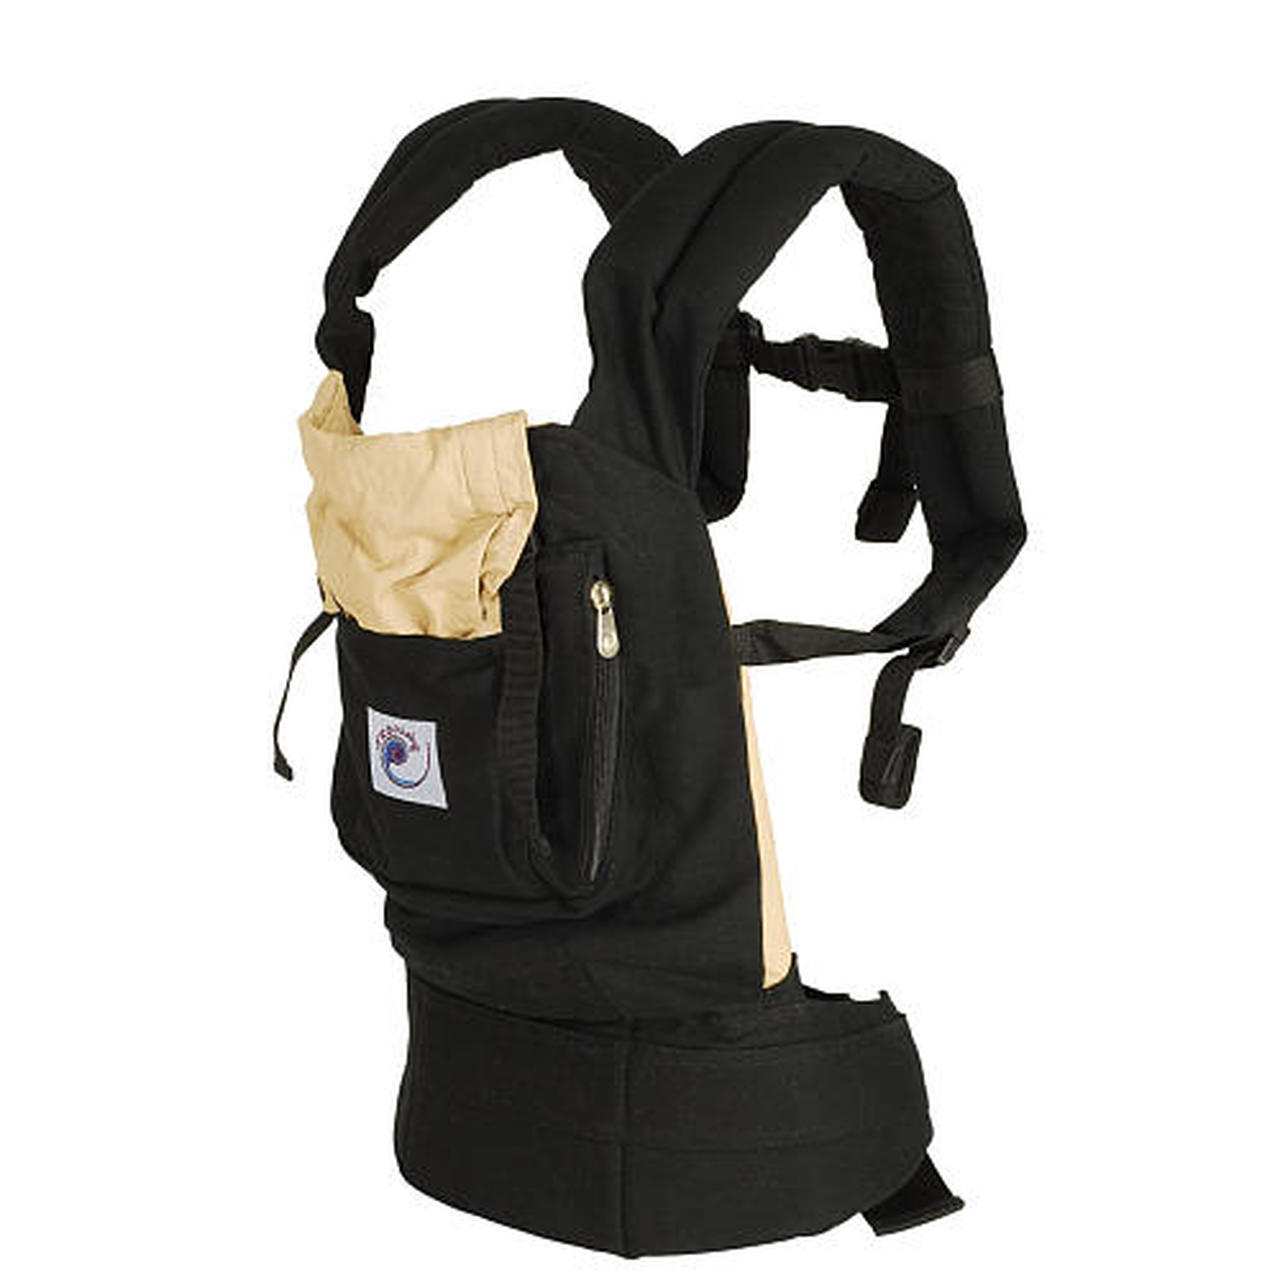 ERGObaby Original Baby Carrier with New Logo